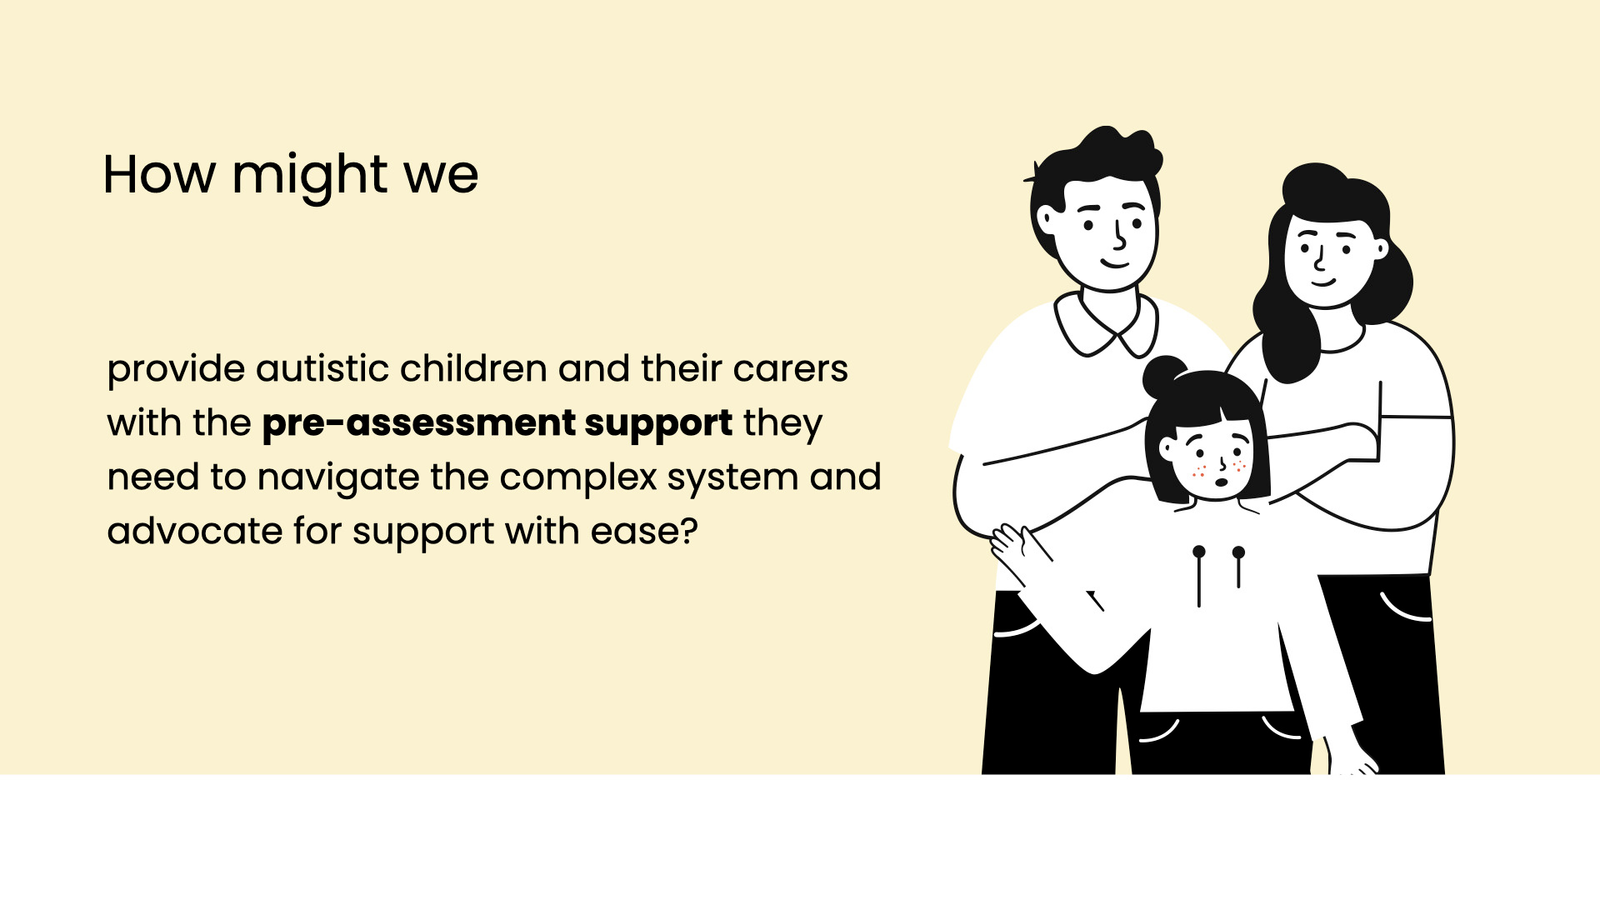 How Might We provide autistic children and their carers with the Pre-assessment Support they need to navigate the complex system and advocate for support with ease?